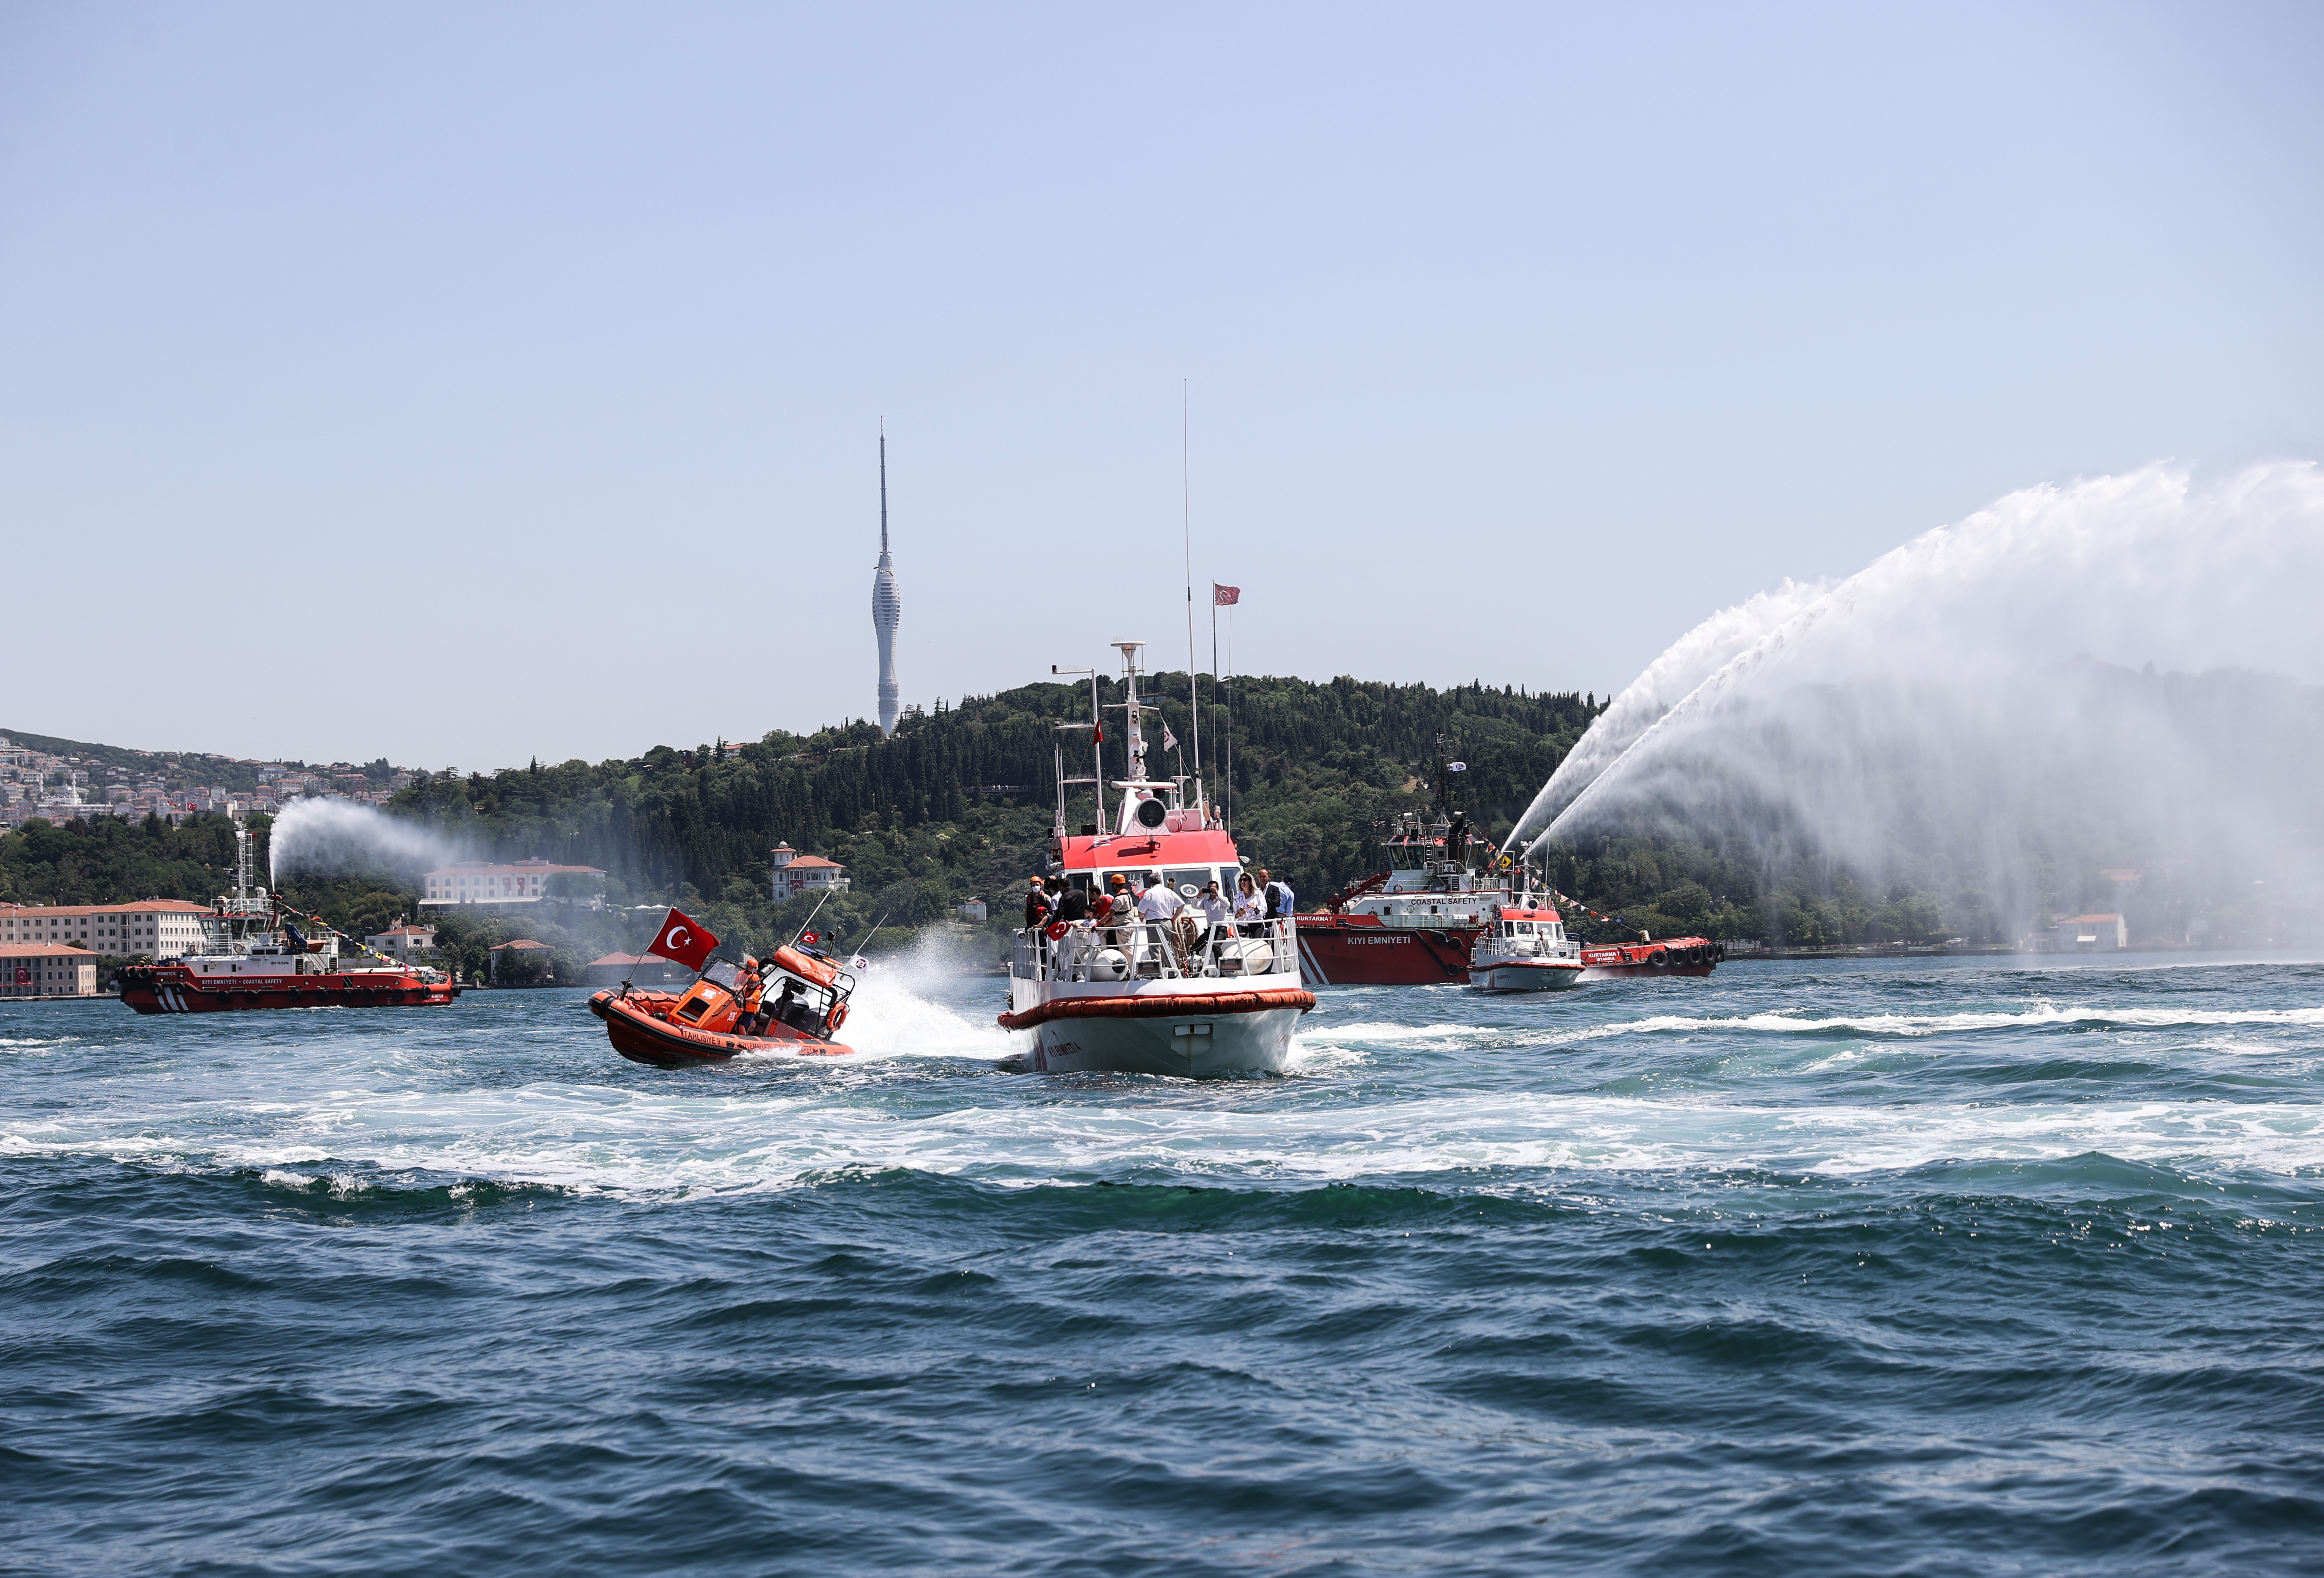 Boats put on show marking July 15 Democracy and National Unity Day in Istanbul